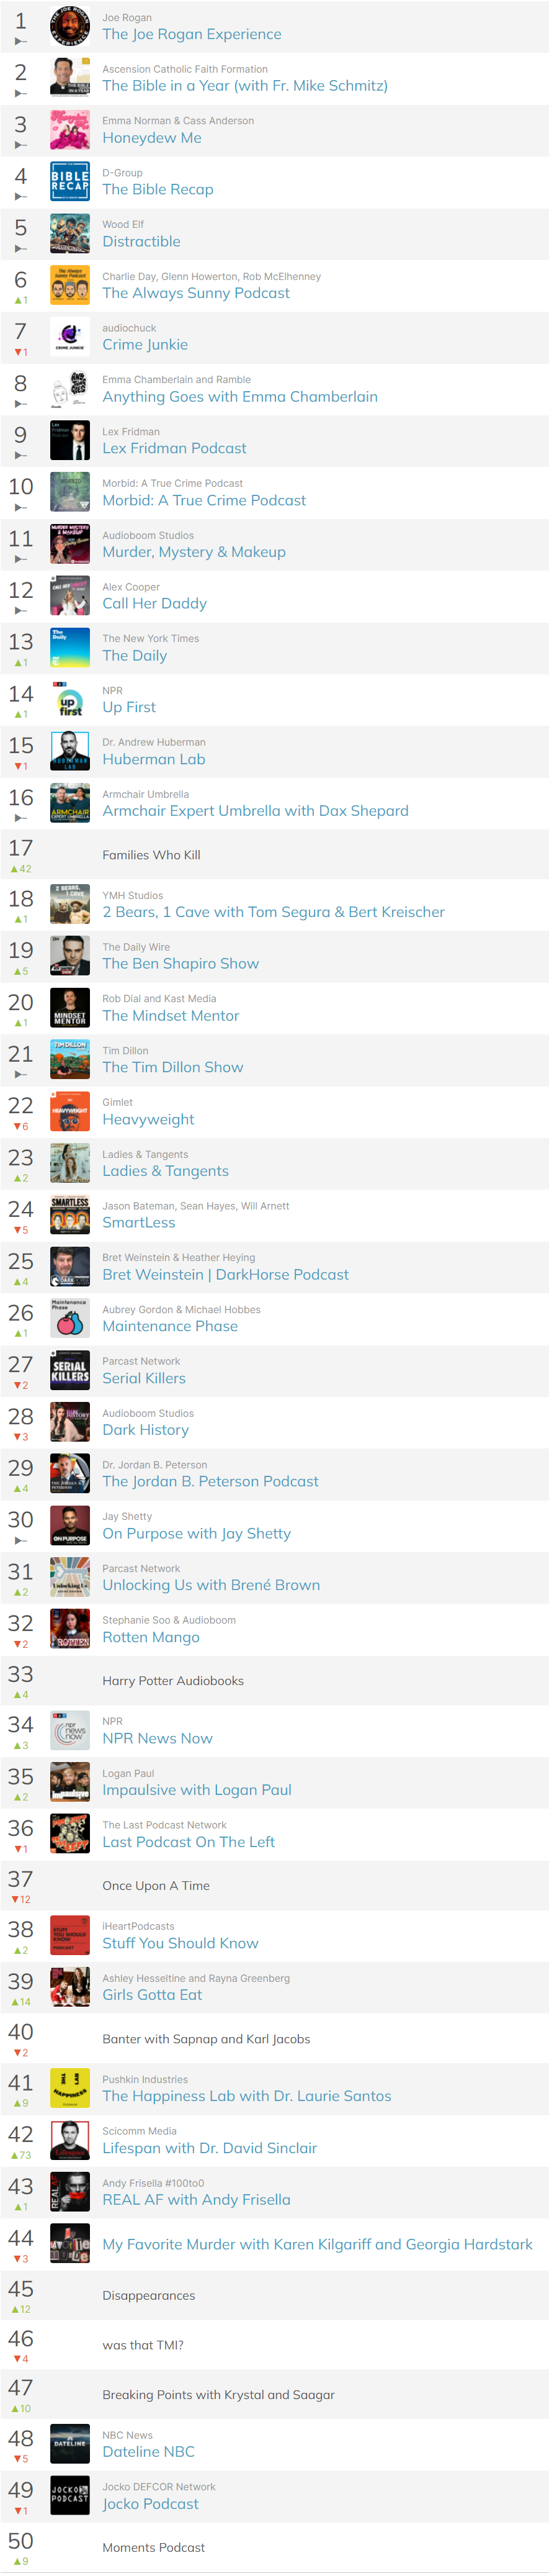 Here Are the Top 50 Podcasts in America This Week